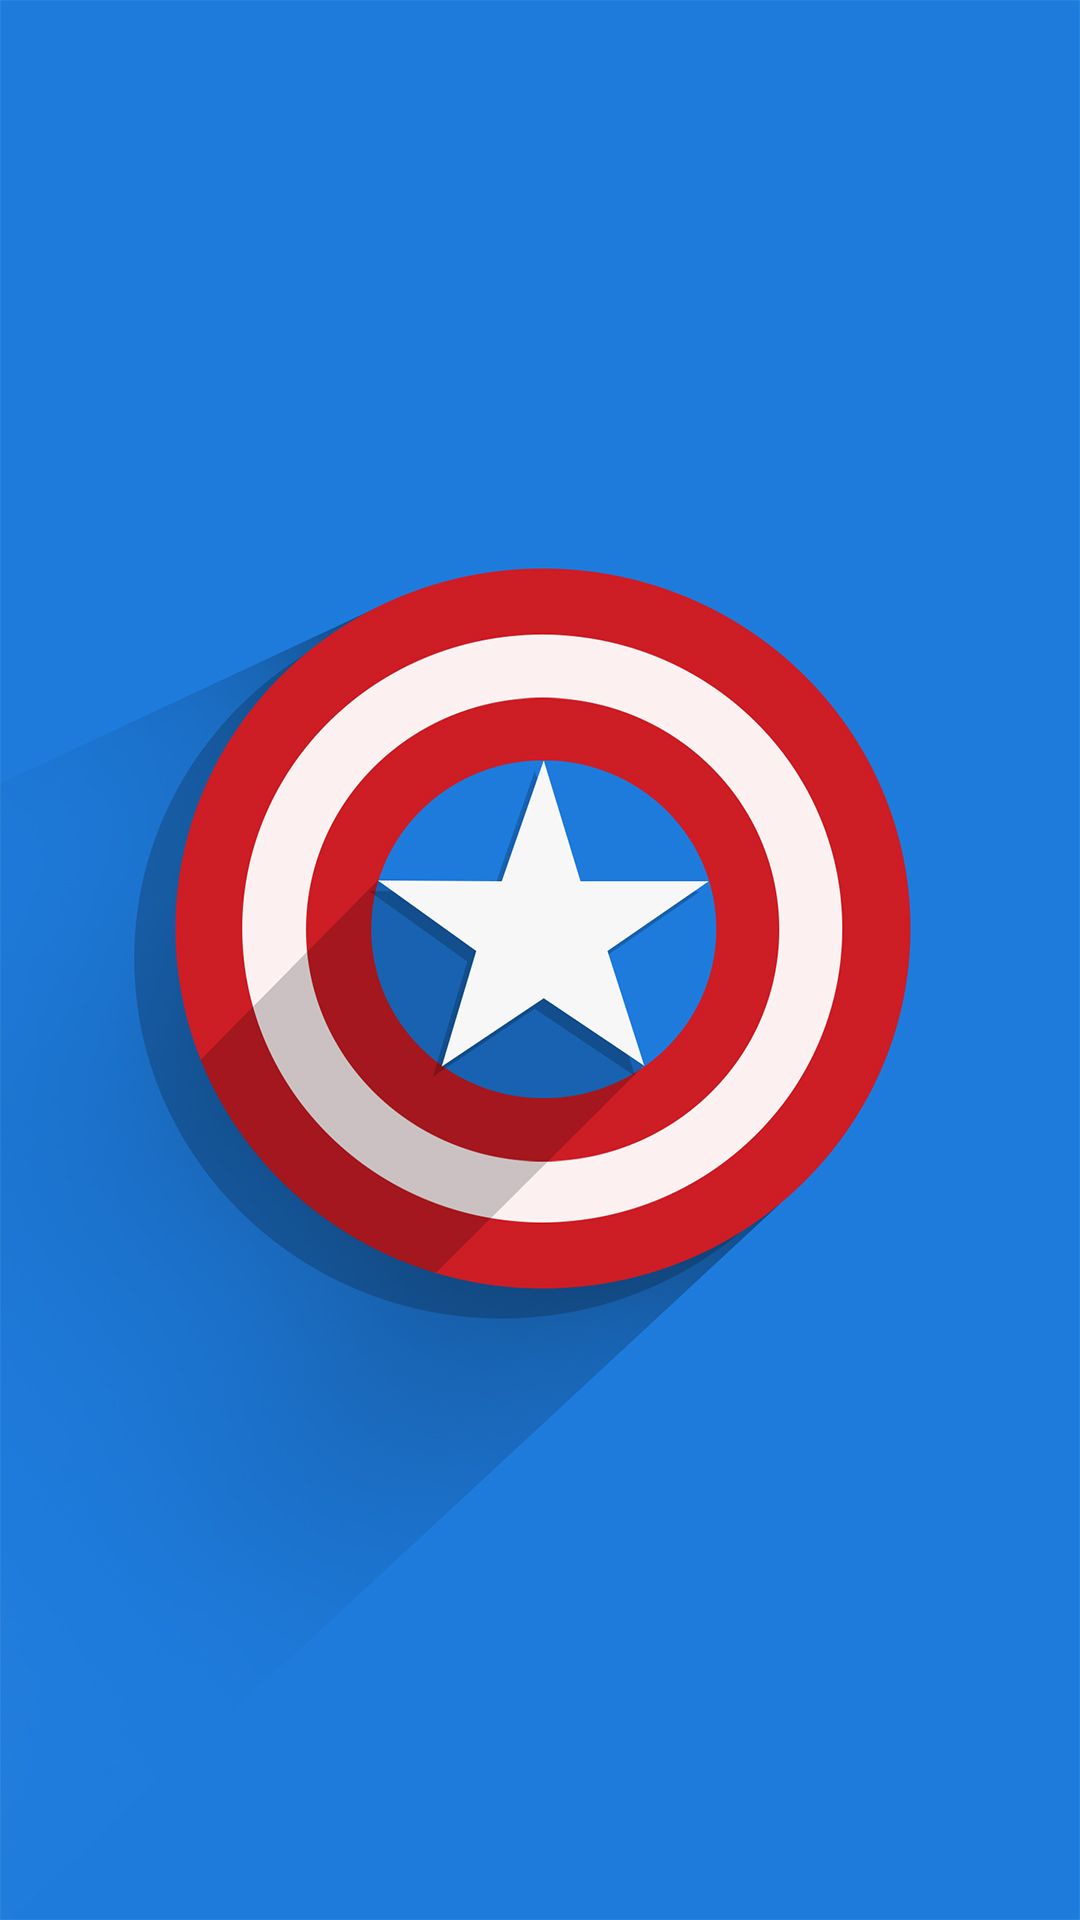 Captain America Shield iPhone Wallpaper with high-resolution 1080x1920 pixel. You can use this wallpaper for your iPhone 5, 6, 7, 8, X, XS, XR backgrounds, Mobile Screensaver, or iPad Lock Screen - Captain America